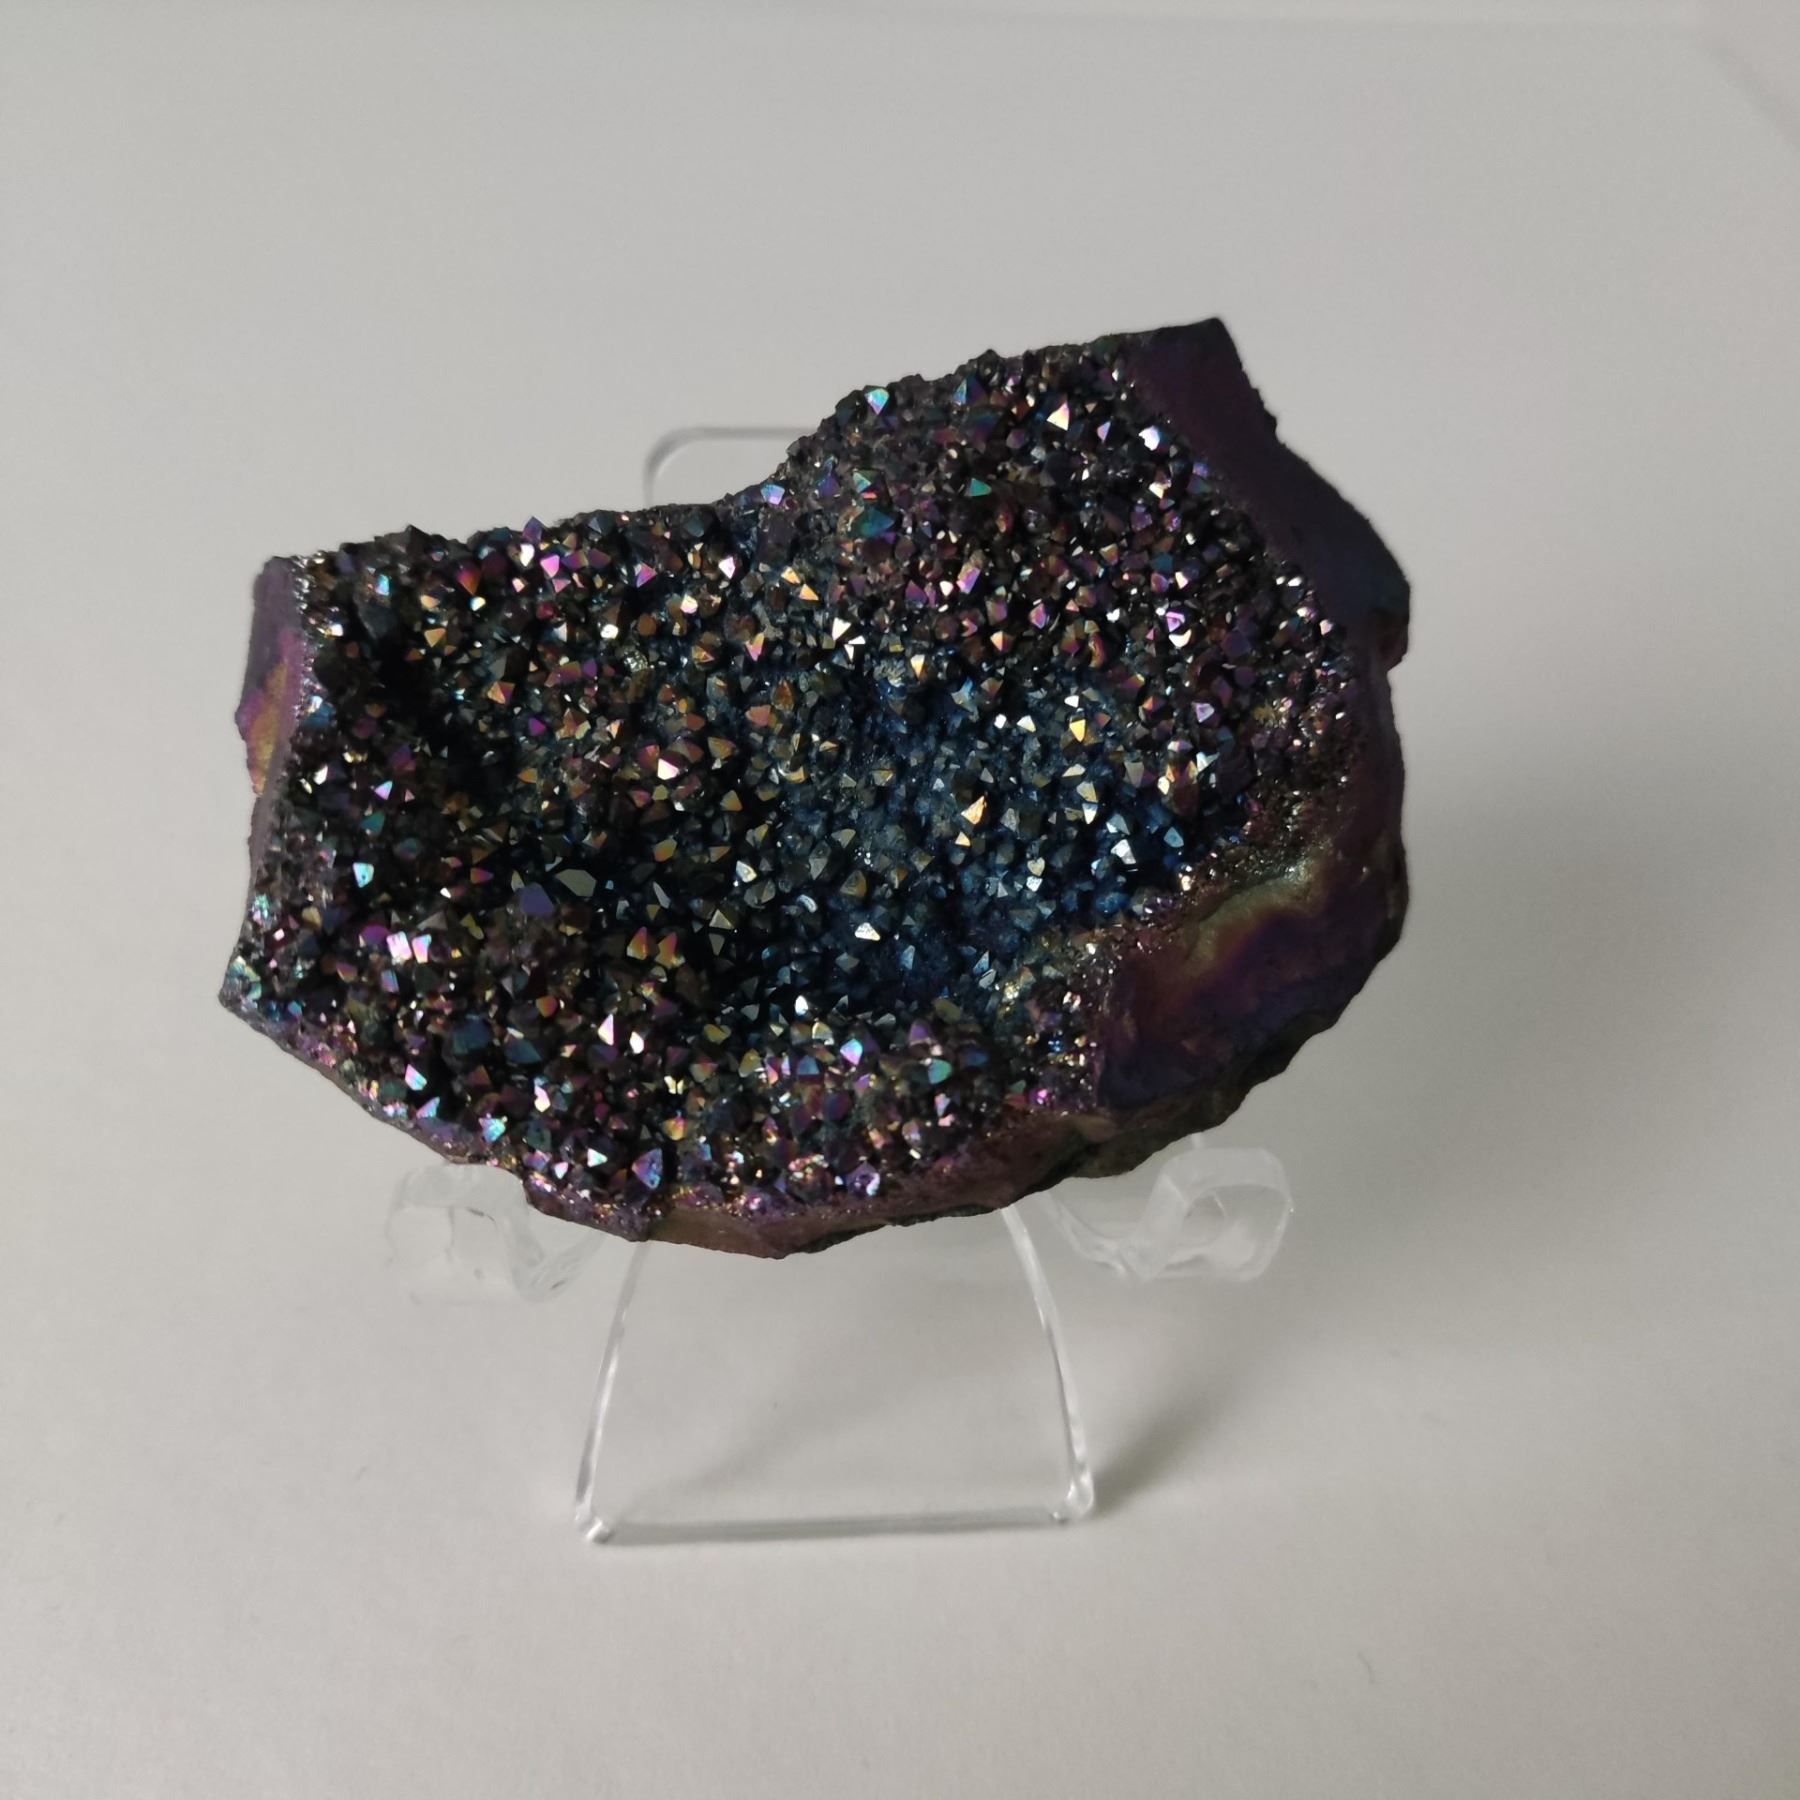 A Titanium aura amethyst rainbow crystal from Namibia and a purple agate slice from Mexico.